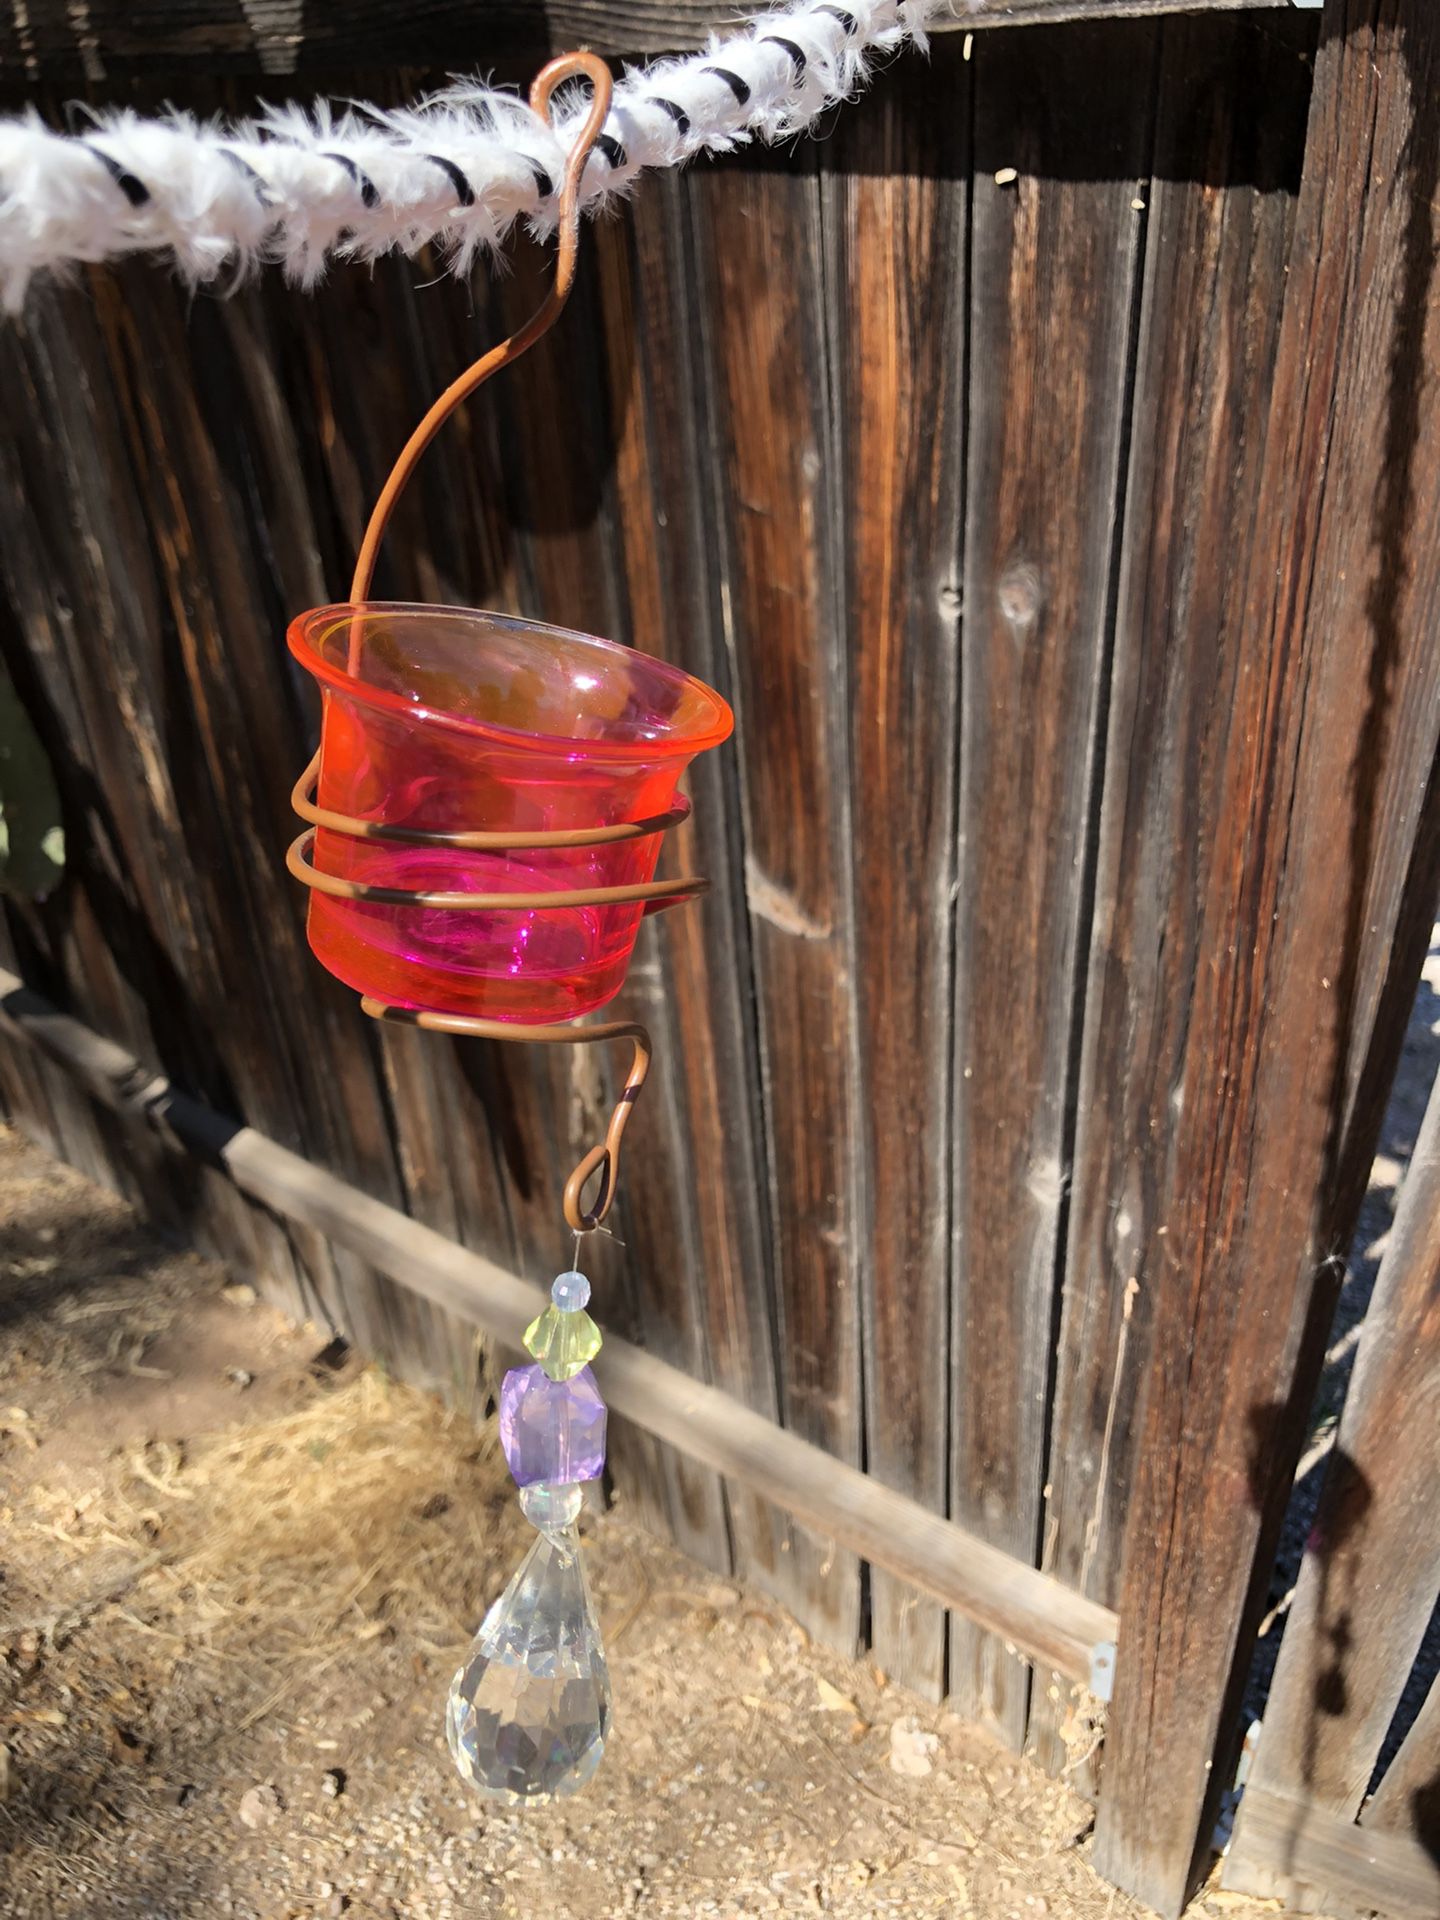  PINK GLASS FLOWER POT OR CANDLE HOLDER